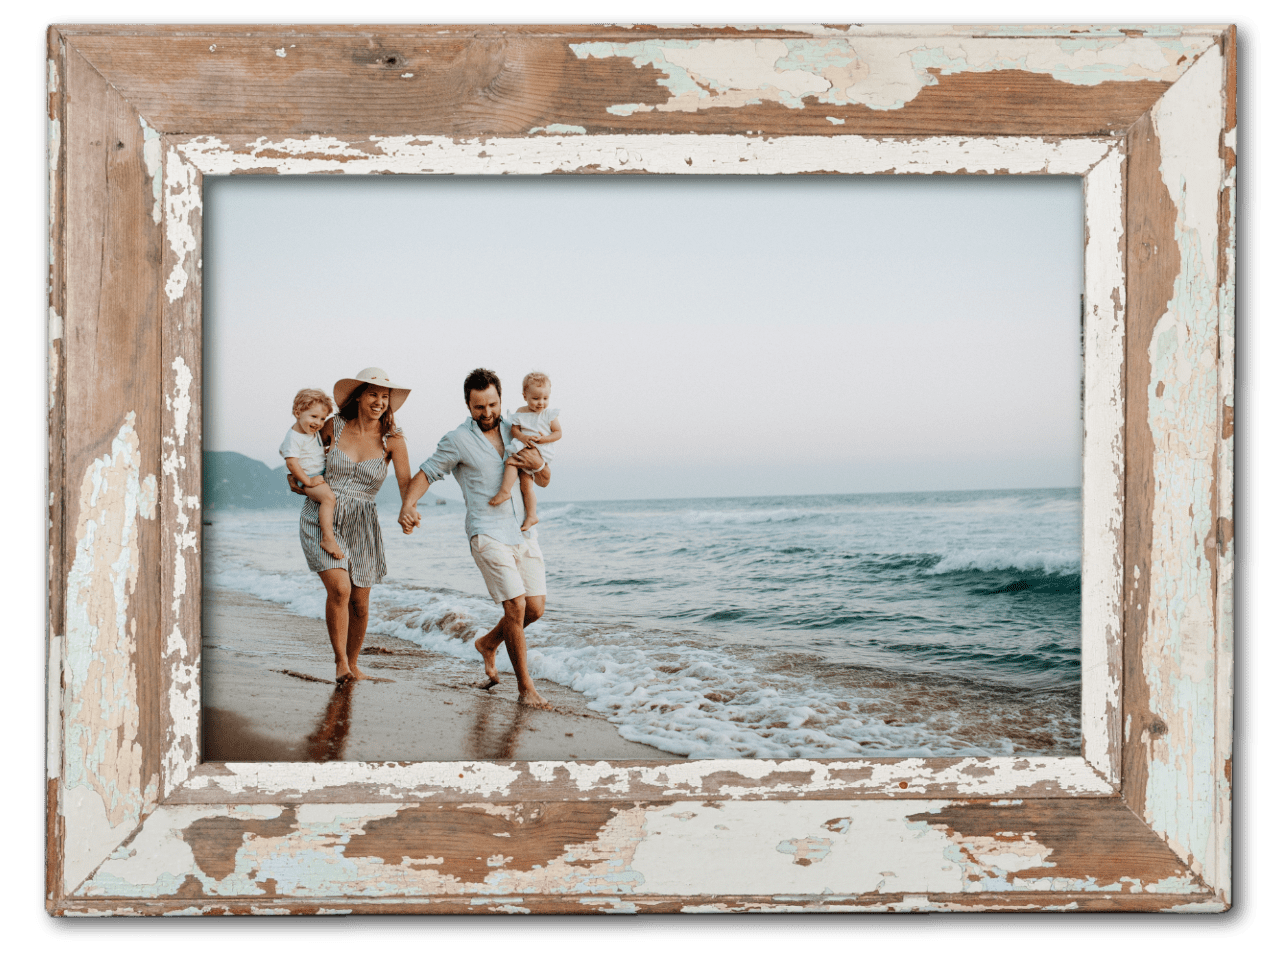 Choosing the right photo frames for your images